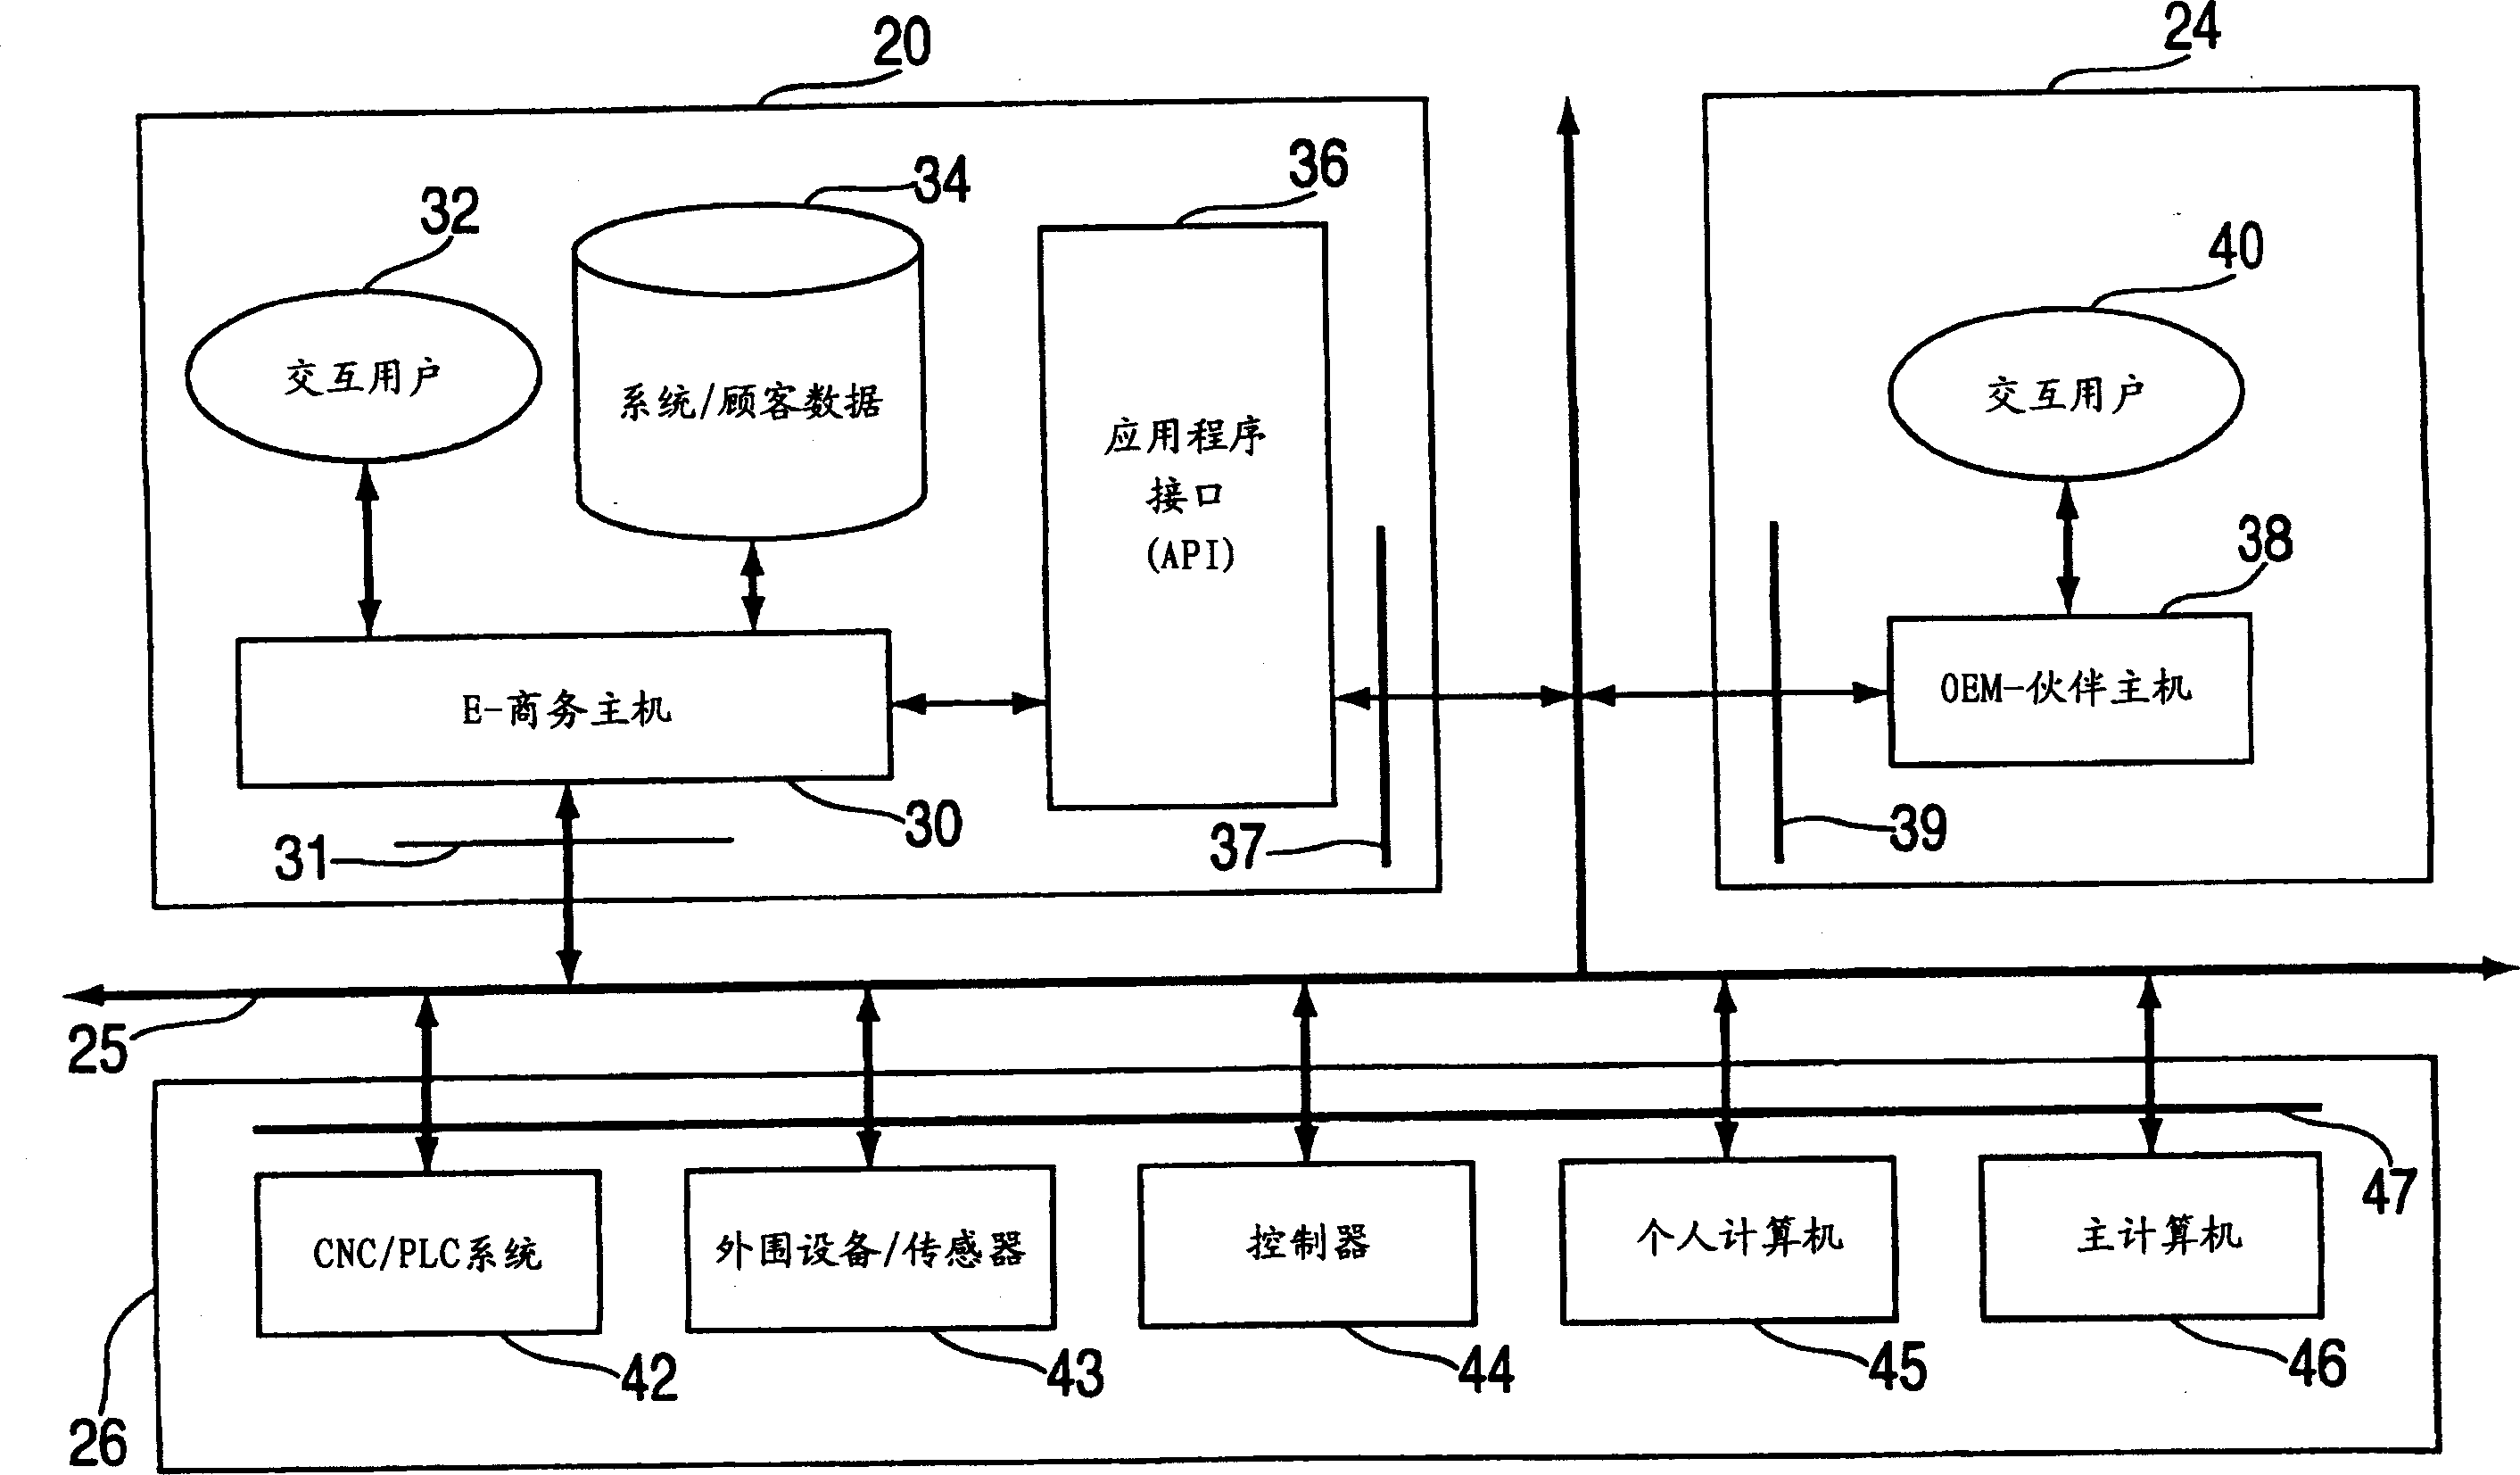 System structure and system for providing cervice to automatic system through network